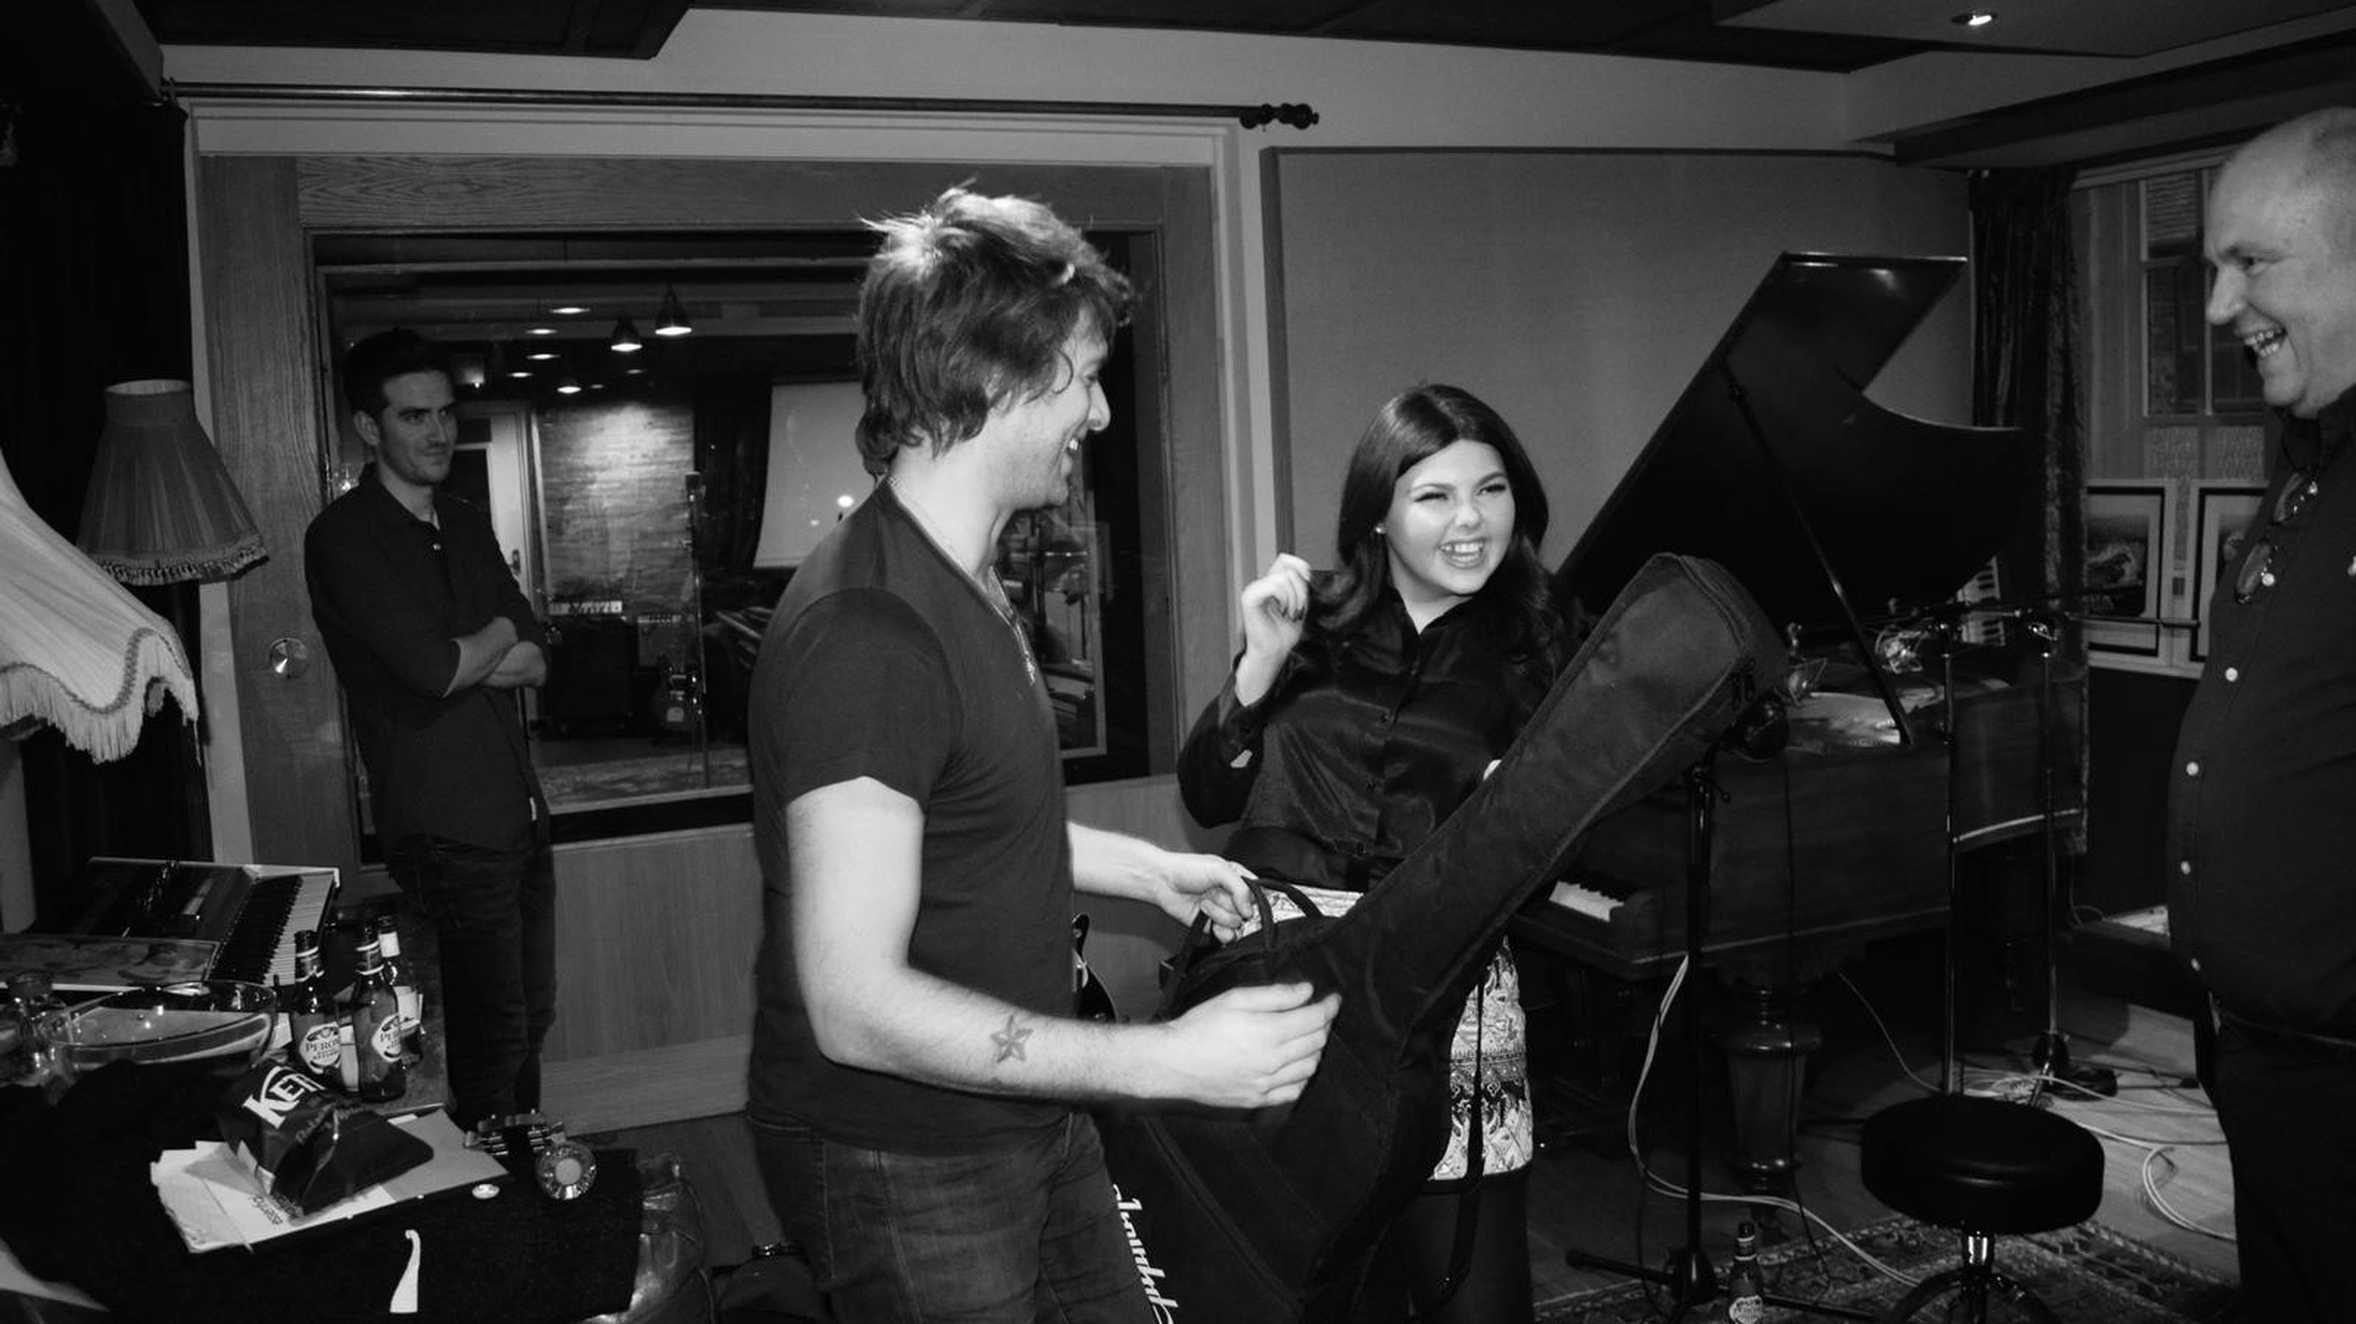 Molly and Paolo Nutini laughing together in front of a piano in his music studio.